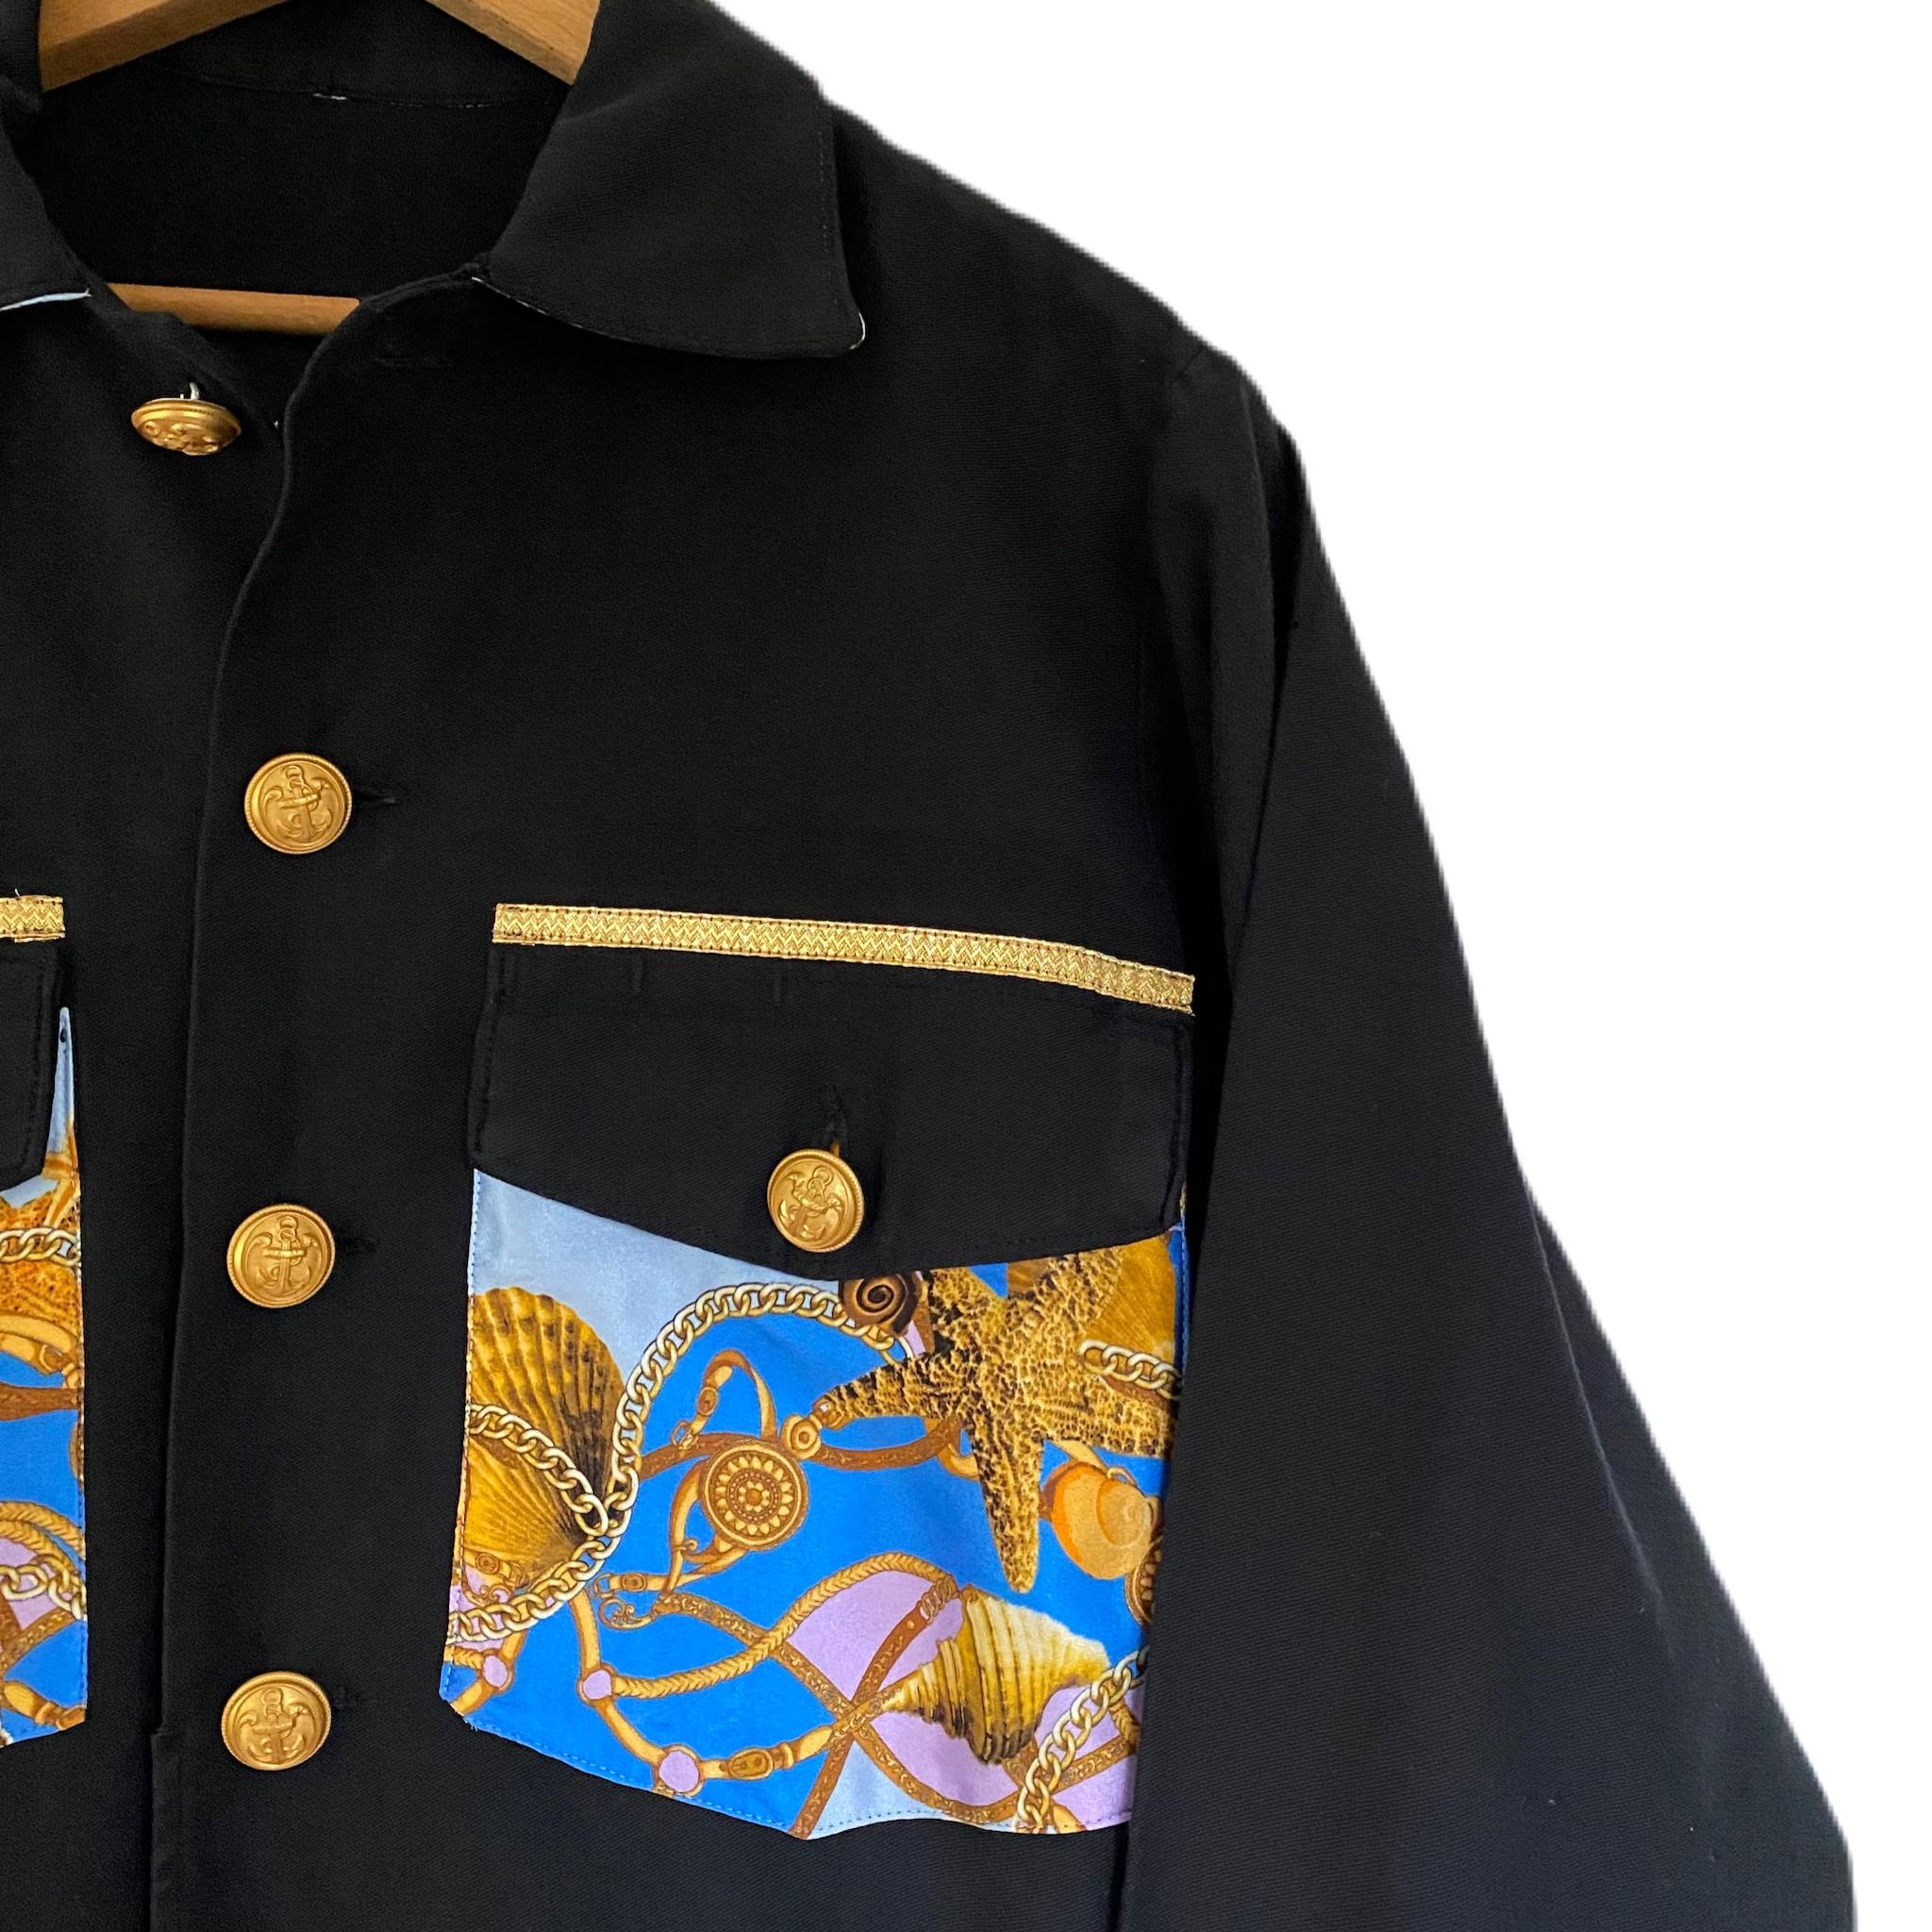 Embellished Black Us Fatigue Shirt Jacket Repurposed with Designer Light Blue Printed Silk and Vintage Collectible Military Vintage Gold Tone Buttons in Brass.

100% Sustainable Created with Vintage and Deadstock.
Brand: J Dauphin

Size: